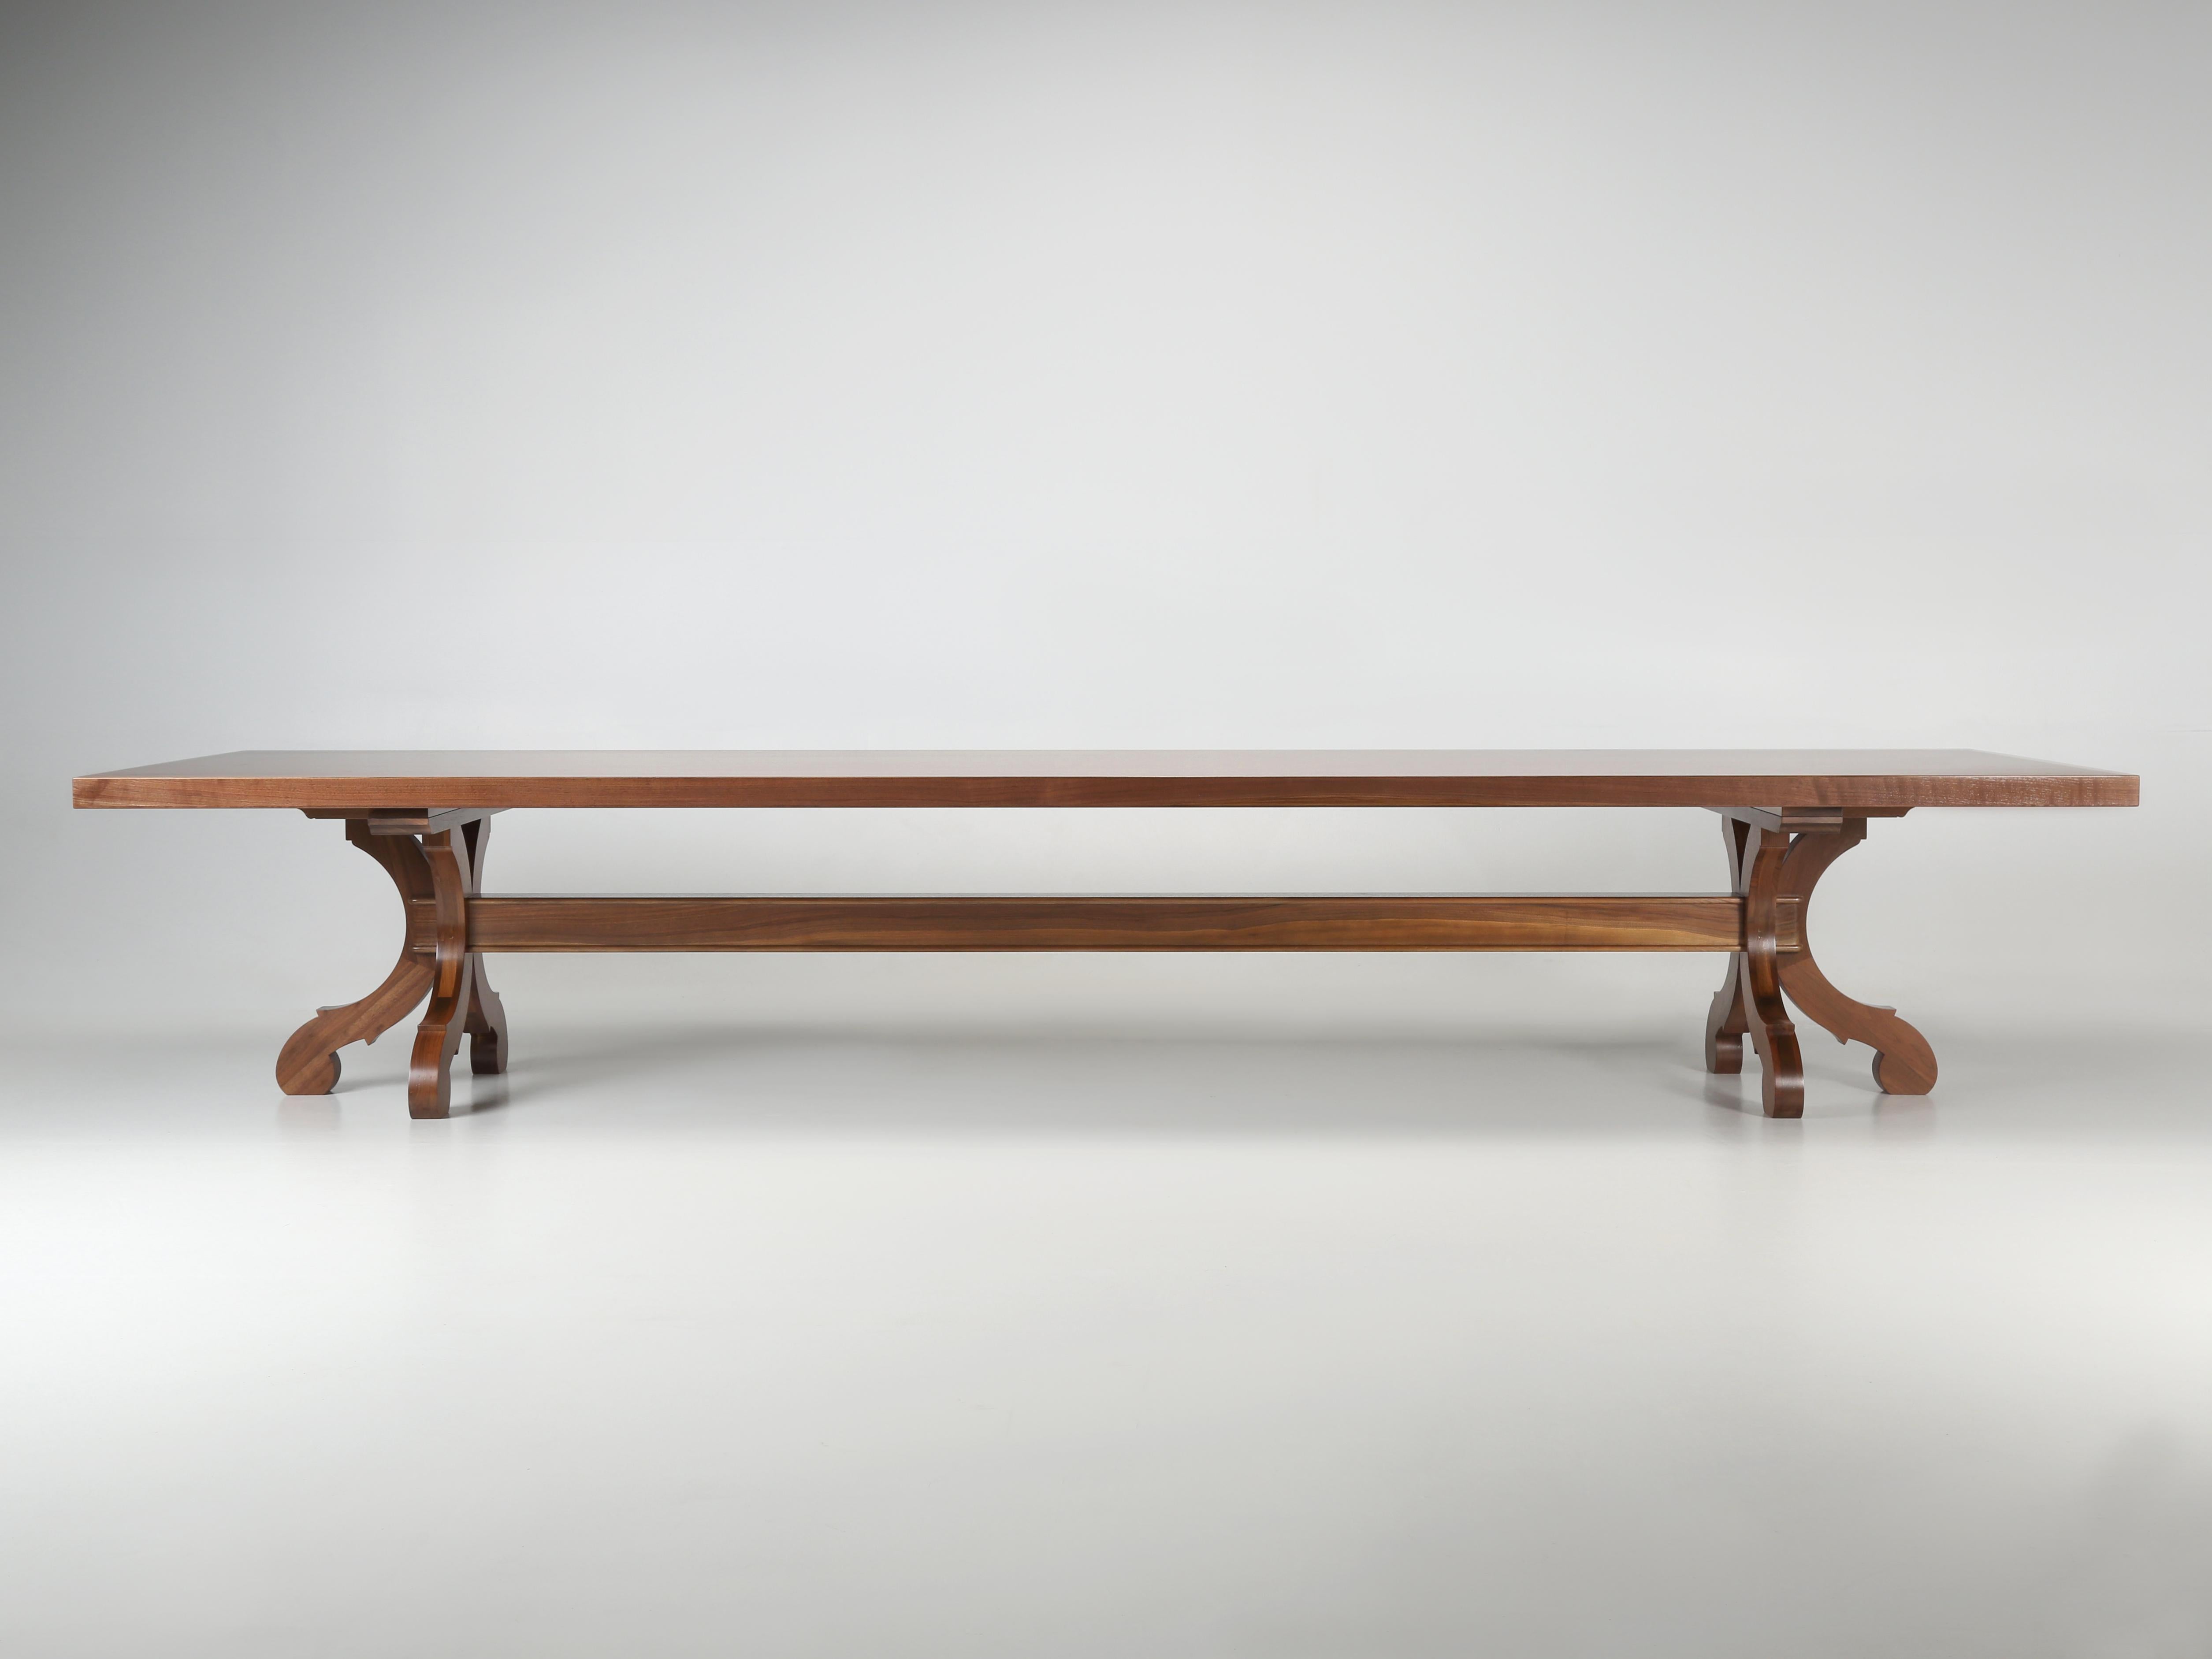 Spectacular, is an understatement for our 14’ Long Walnut Dining Table that will comfortably seat 16-20 family members, or close friends for that special occasion. The longer you look at our Walnut Trestle Dining Table, the more you will begin to